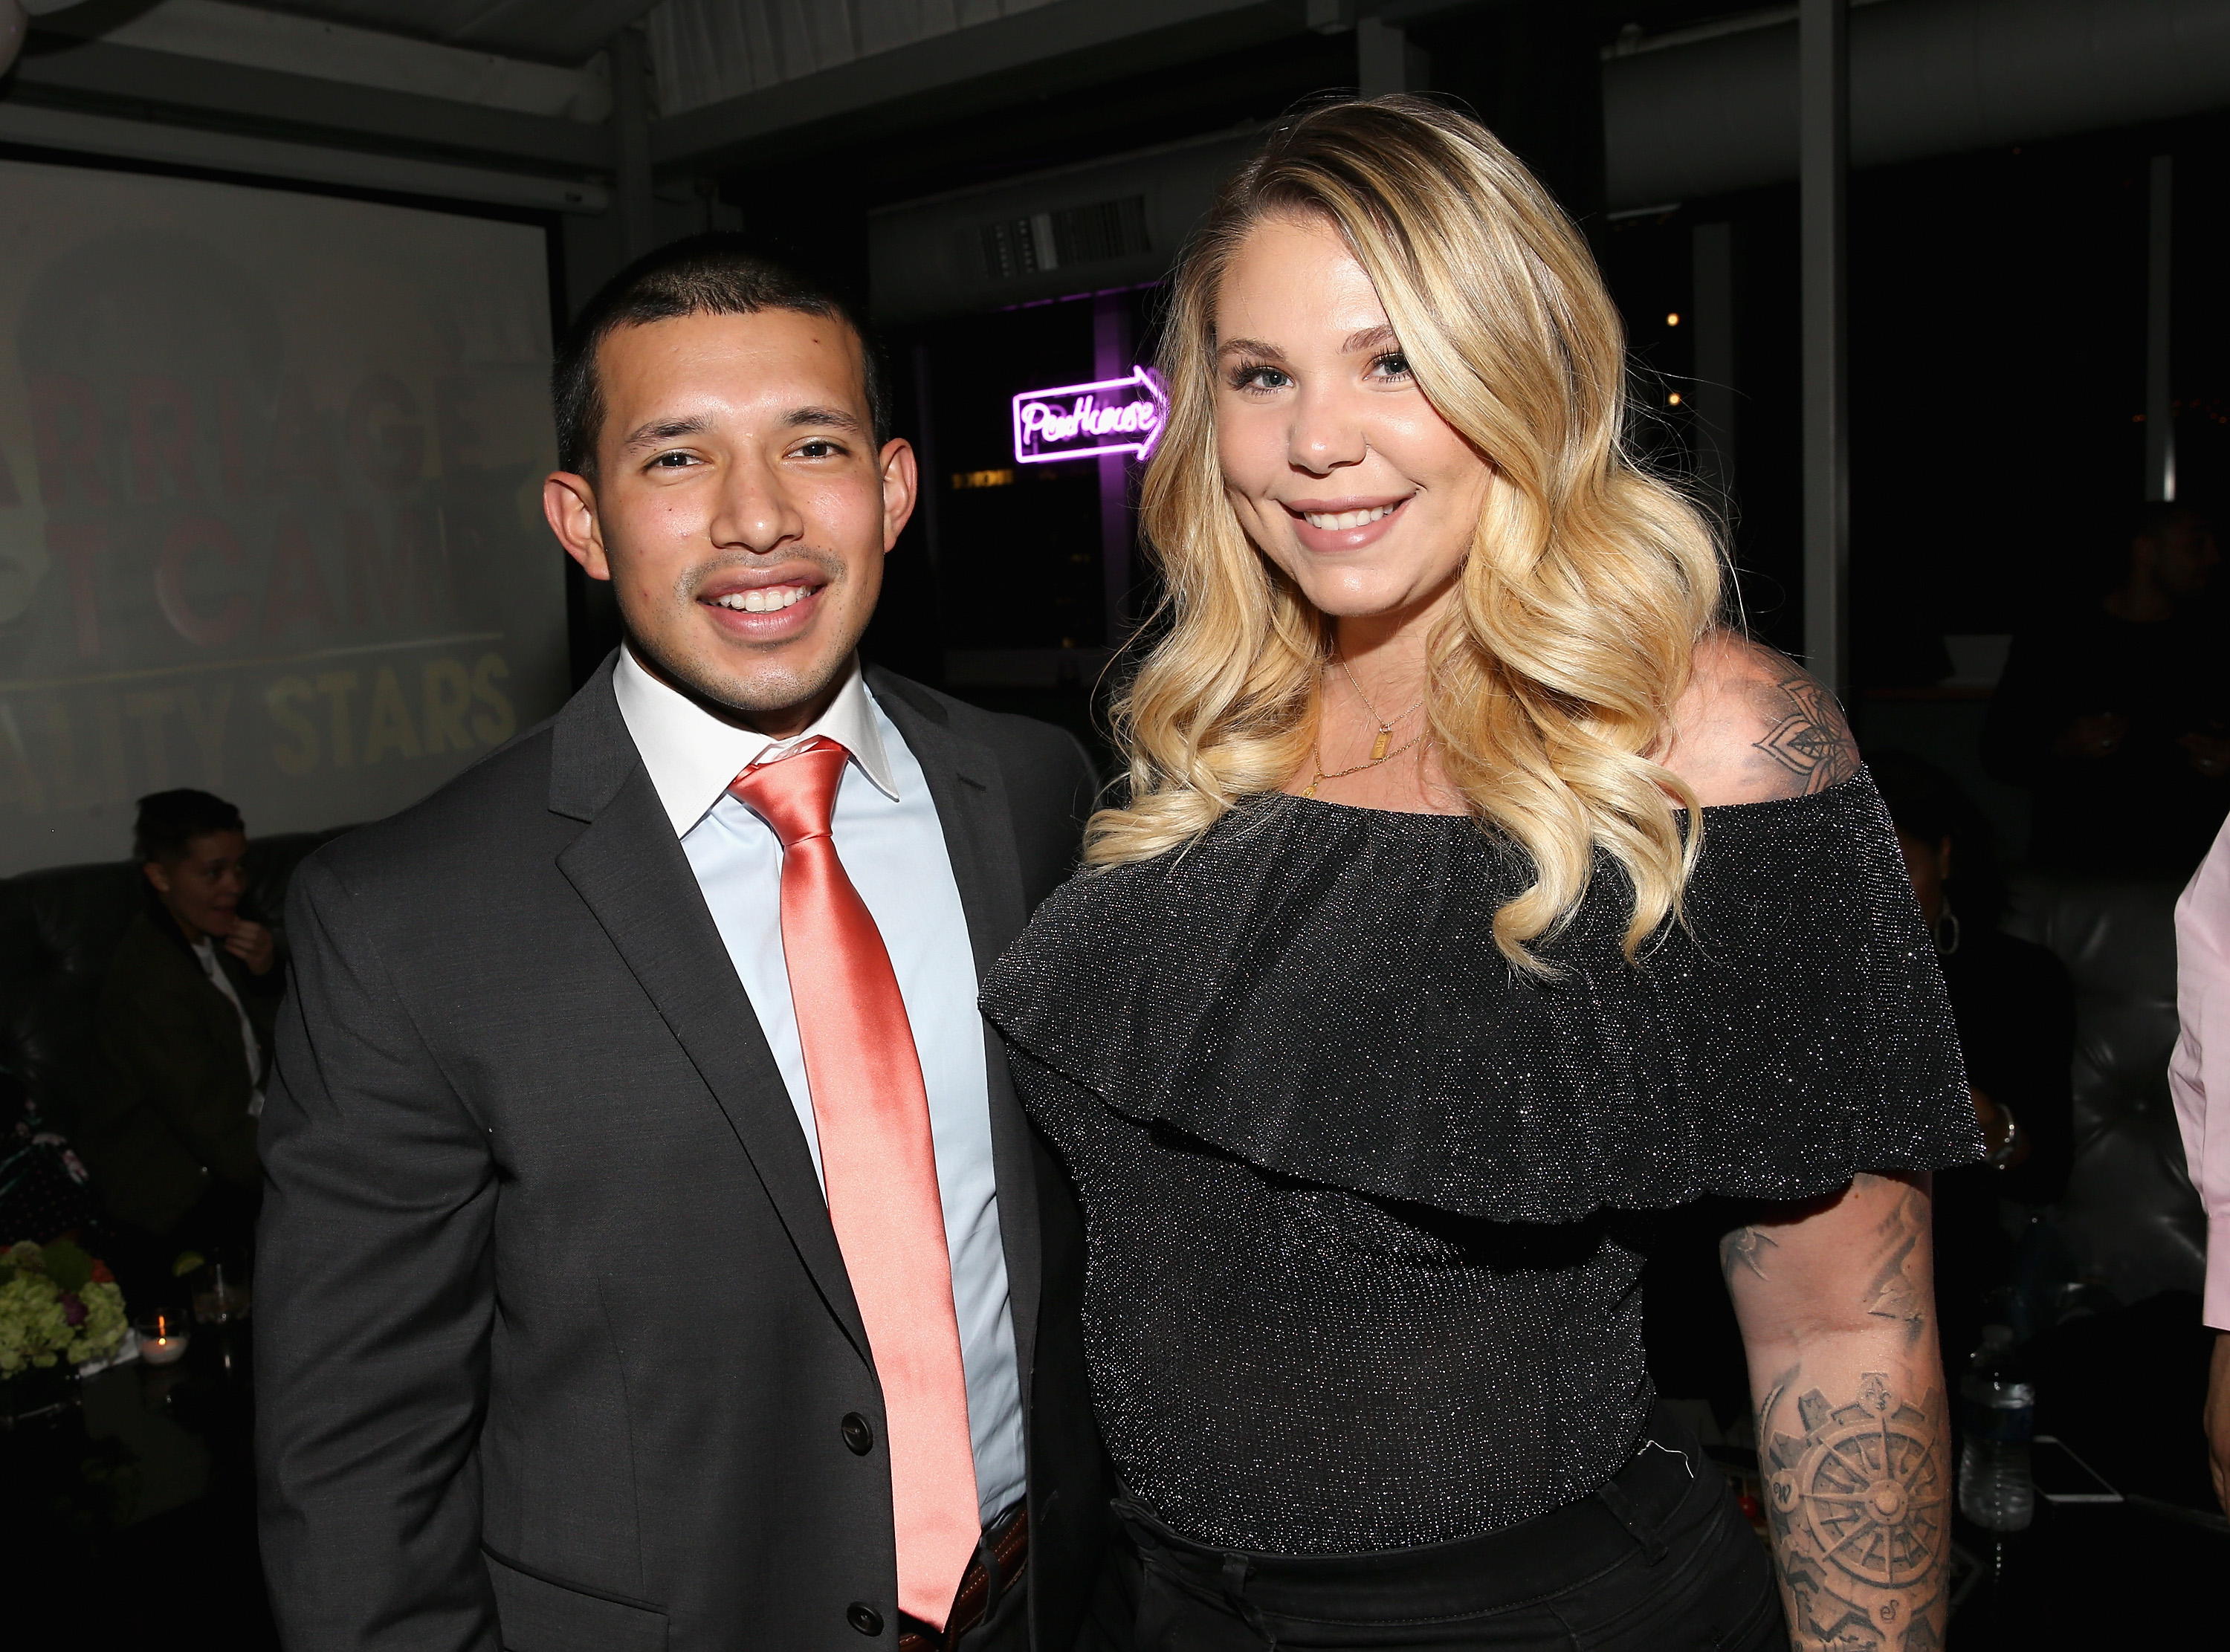 Kailyn was previously married to Javi Marroquin